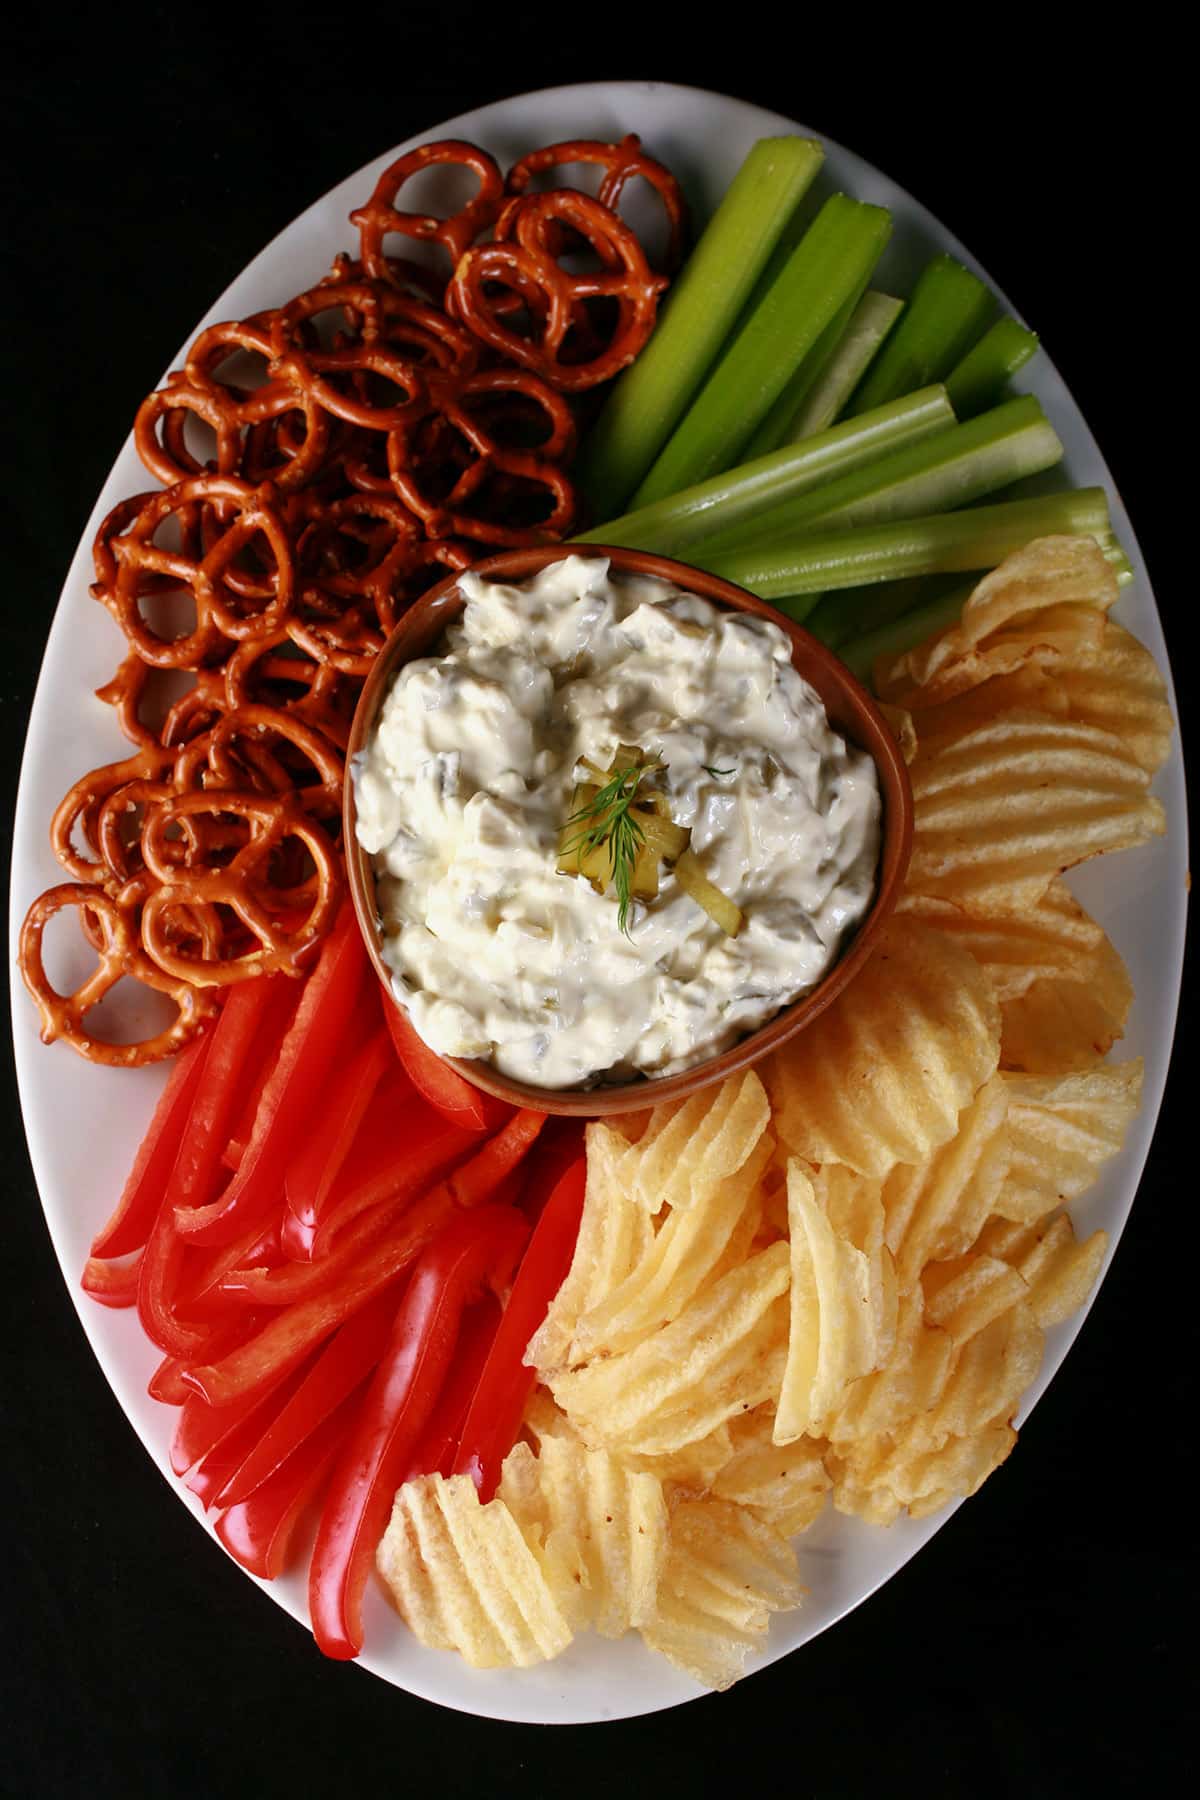 A bowl of dill pickle cream cheese dip - based on the Phiadelphia Cream Cheese brand dip - surrounded with chips, pretzels, and vegetables.